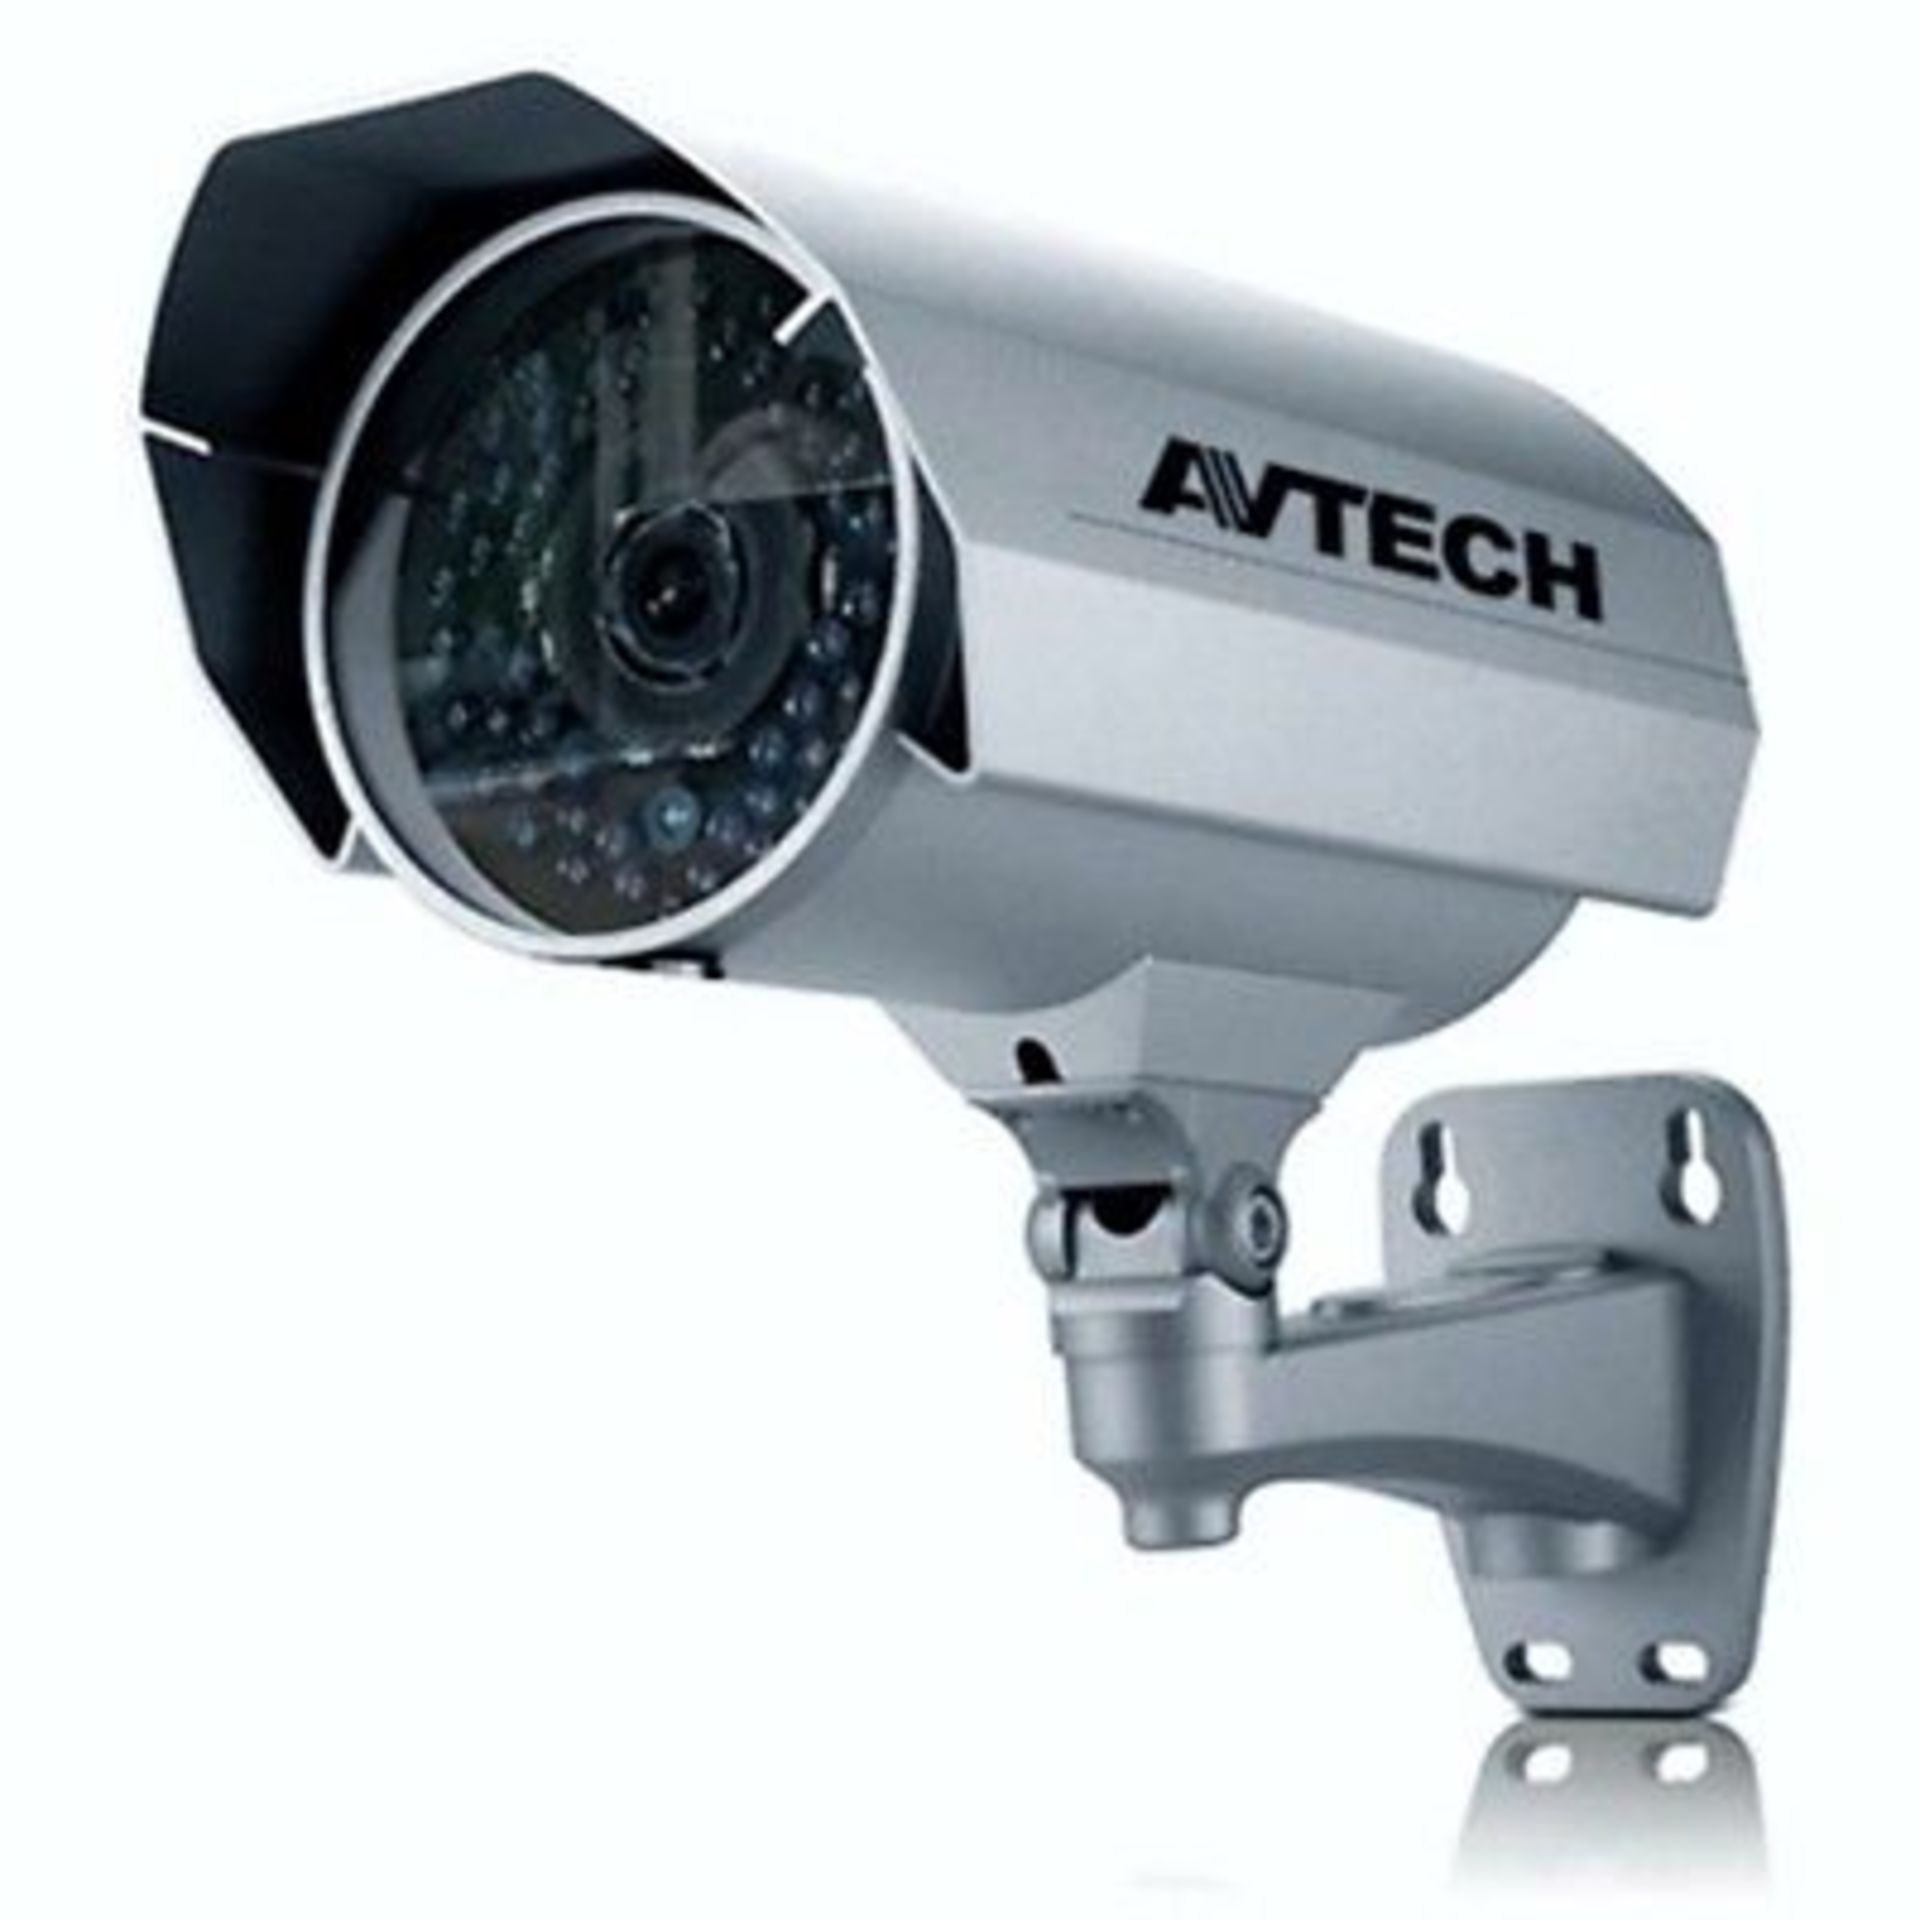 V *TRADE QTY* Brand New Avtech VGA IR Bullet Camera - Cable Management- IP67 X 5 YOUR BID PRICE TO